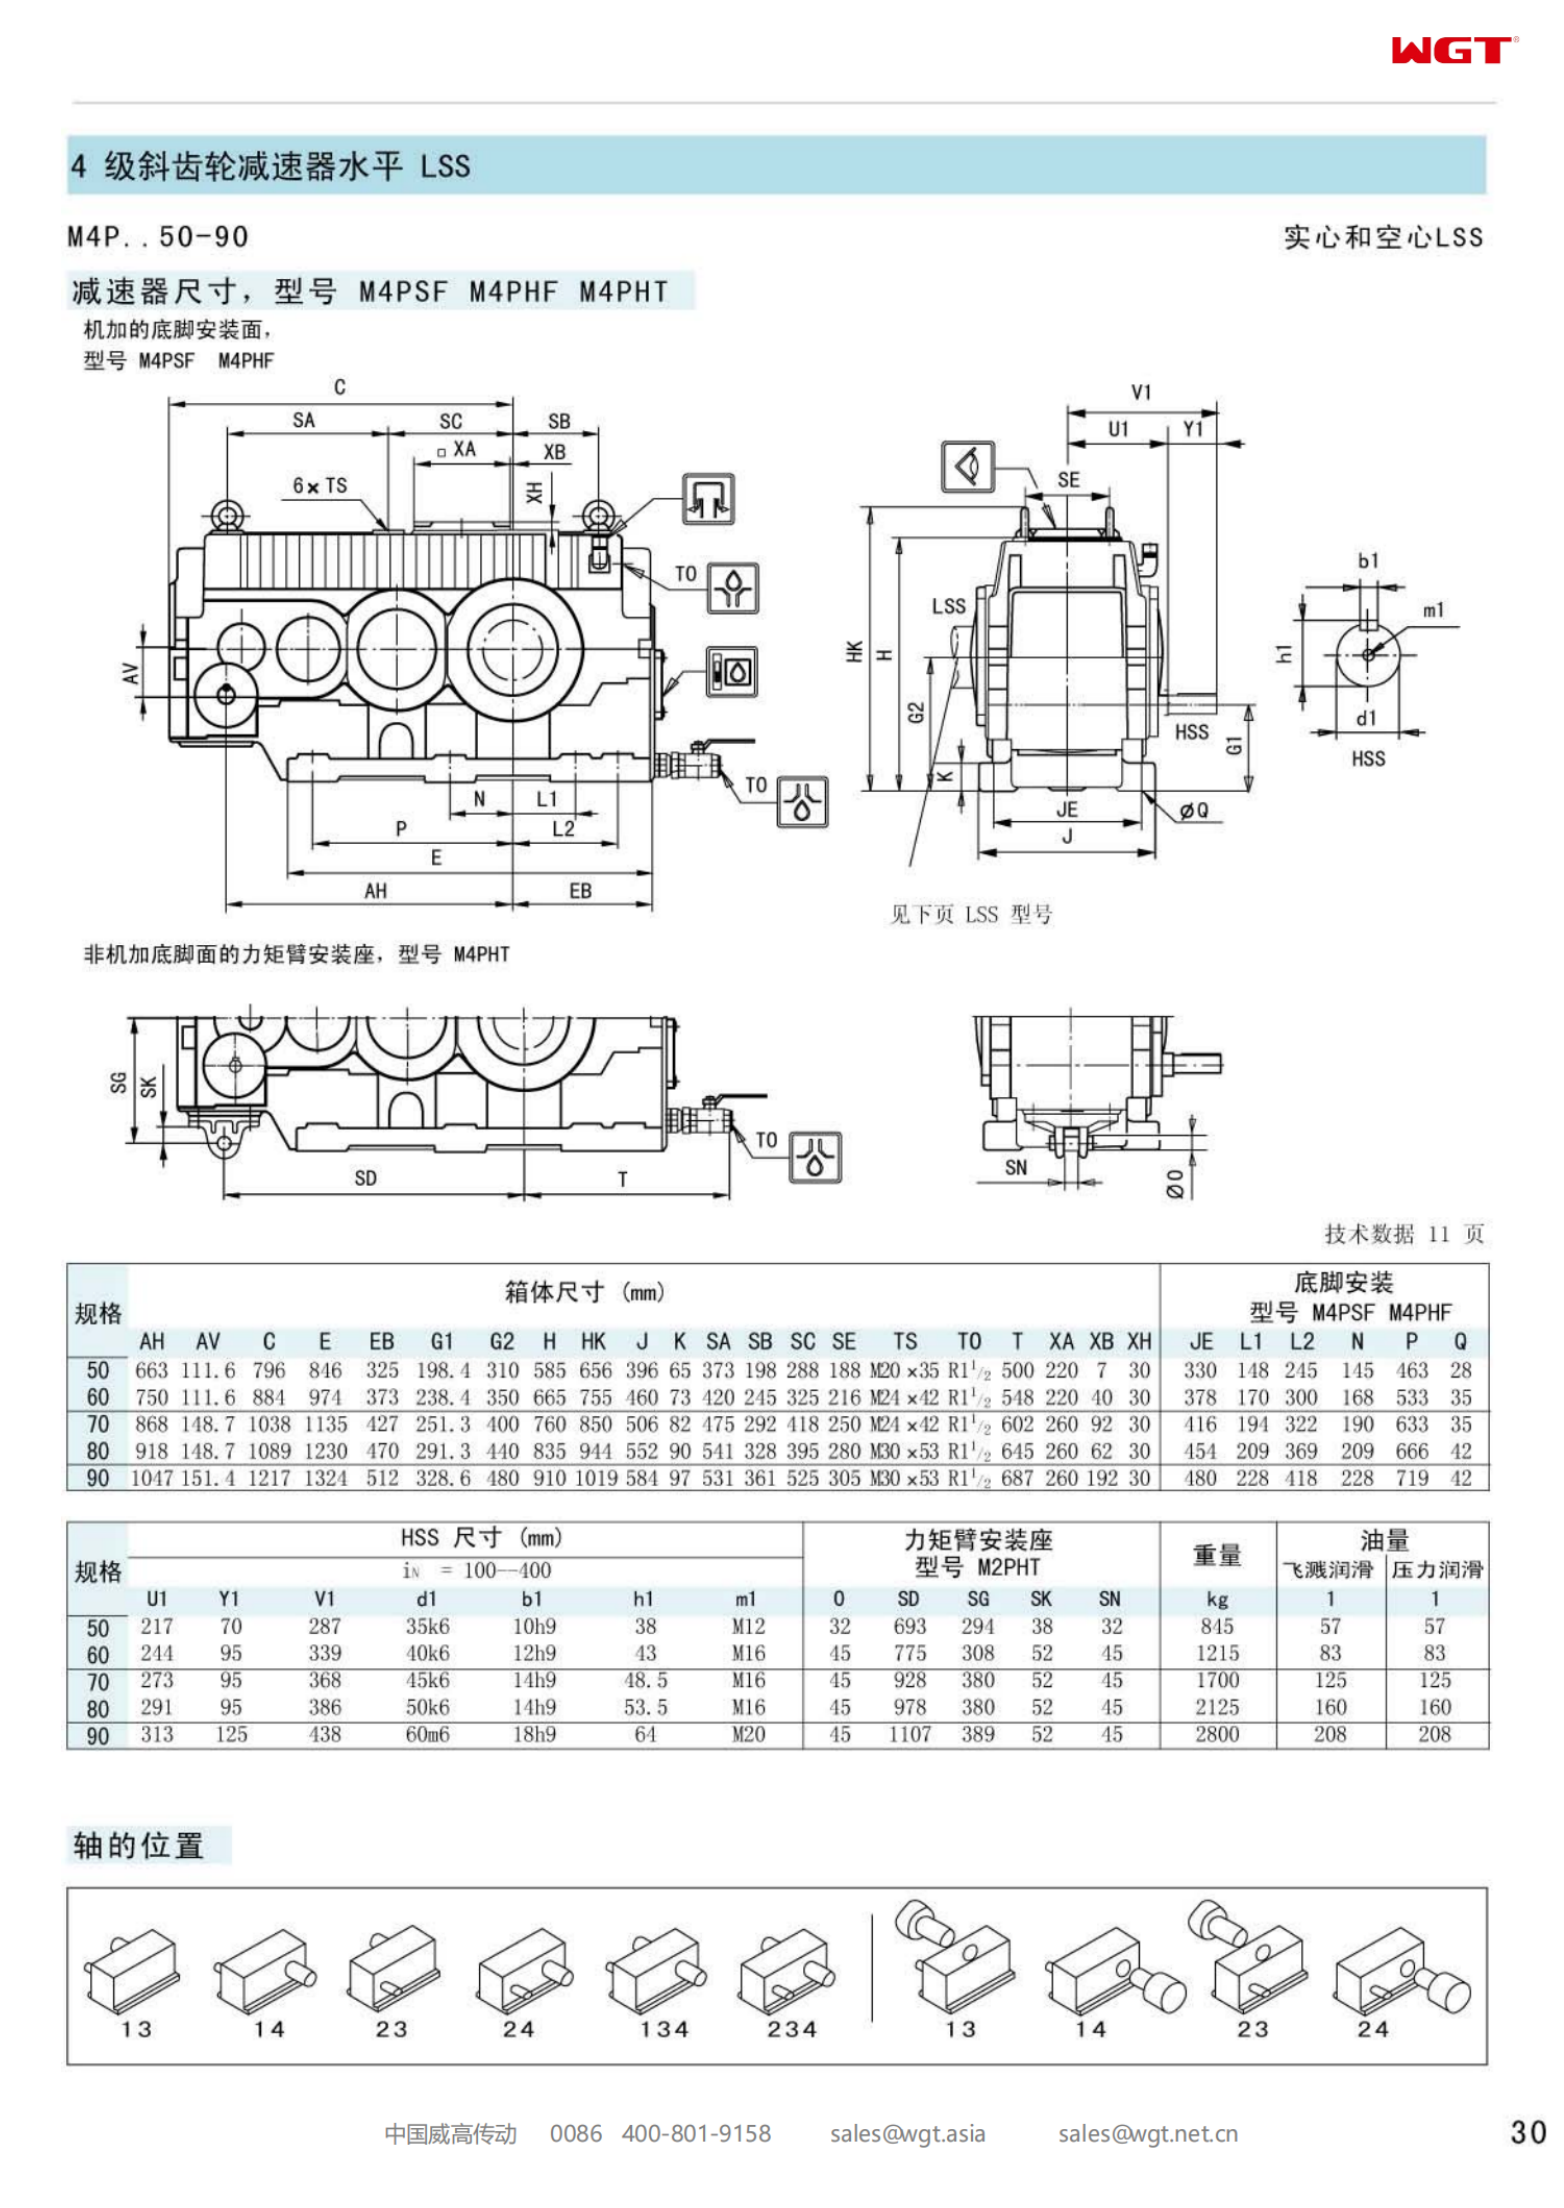 M4PHT50 Replace_SEW_M_Series Gearbox